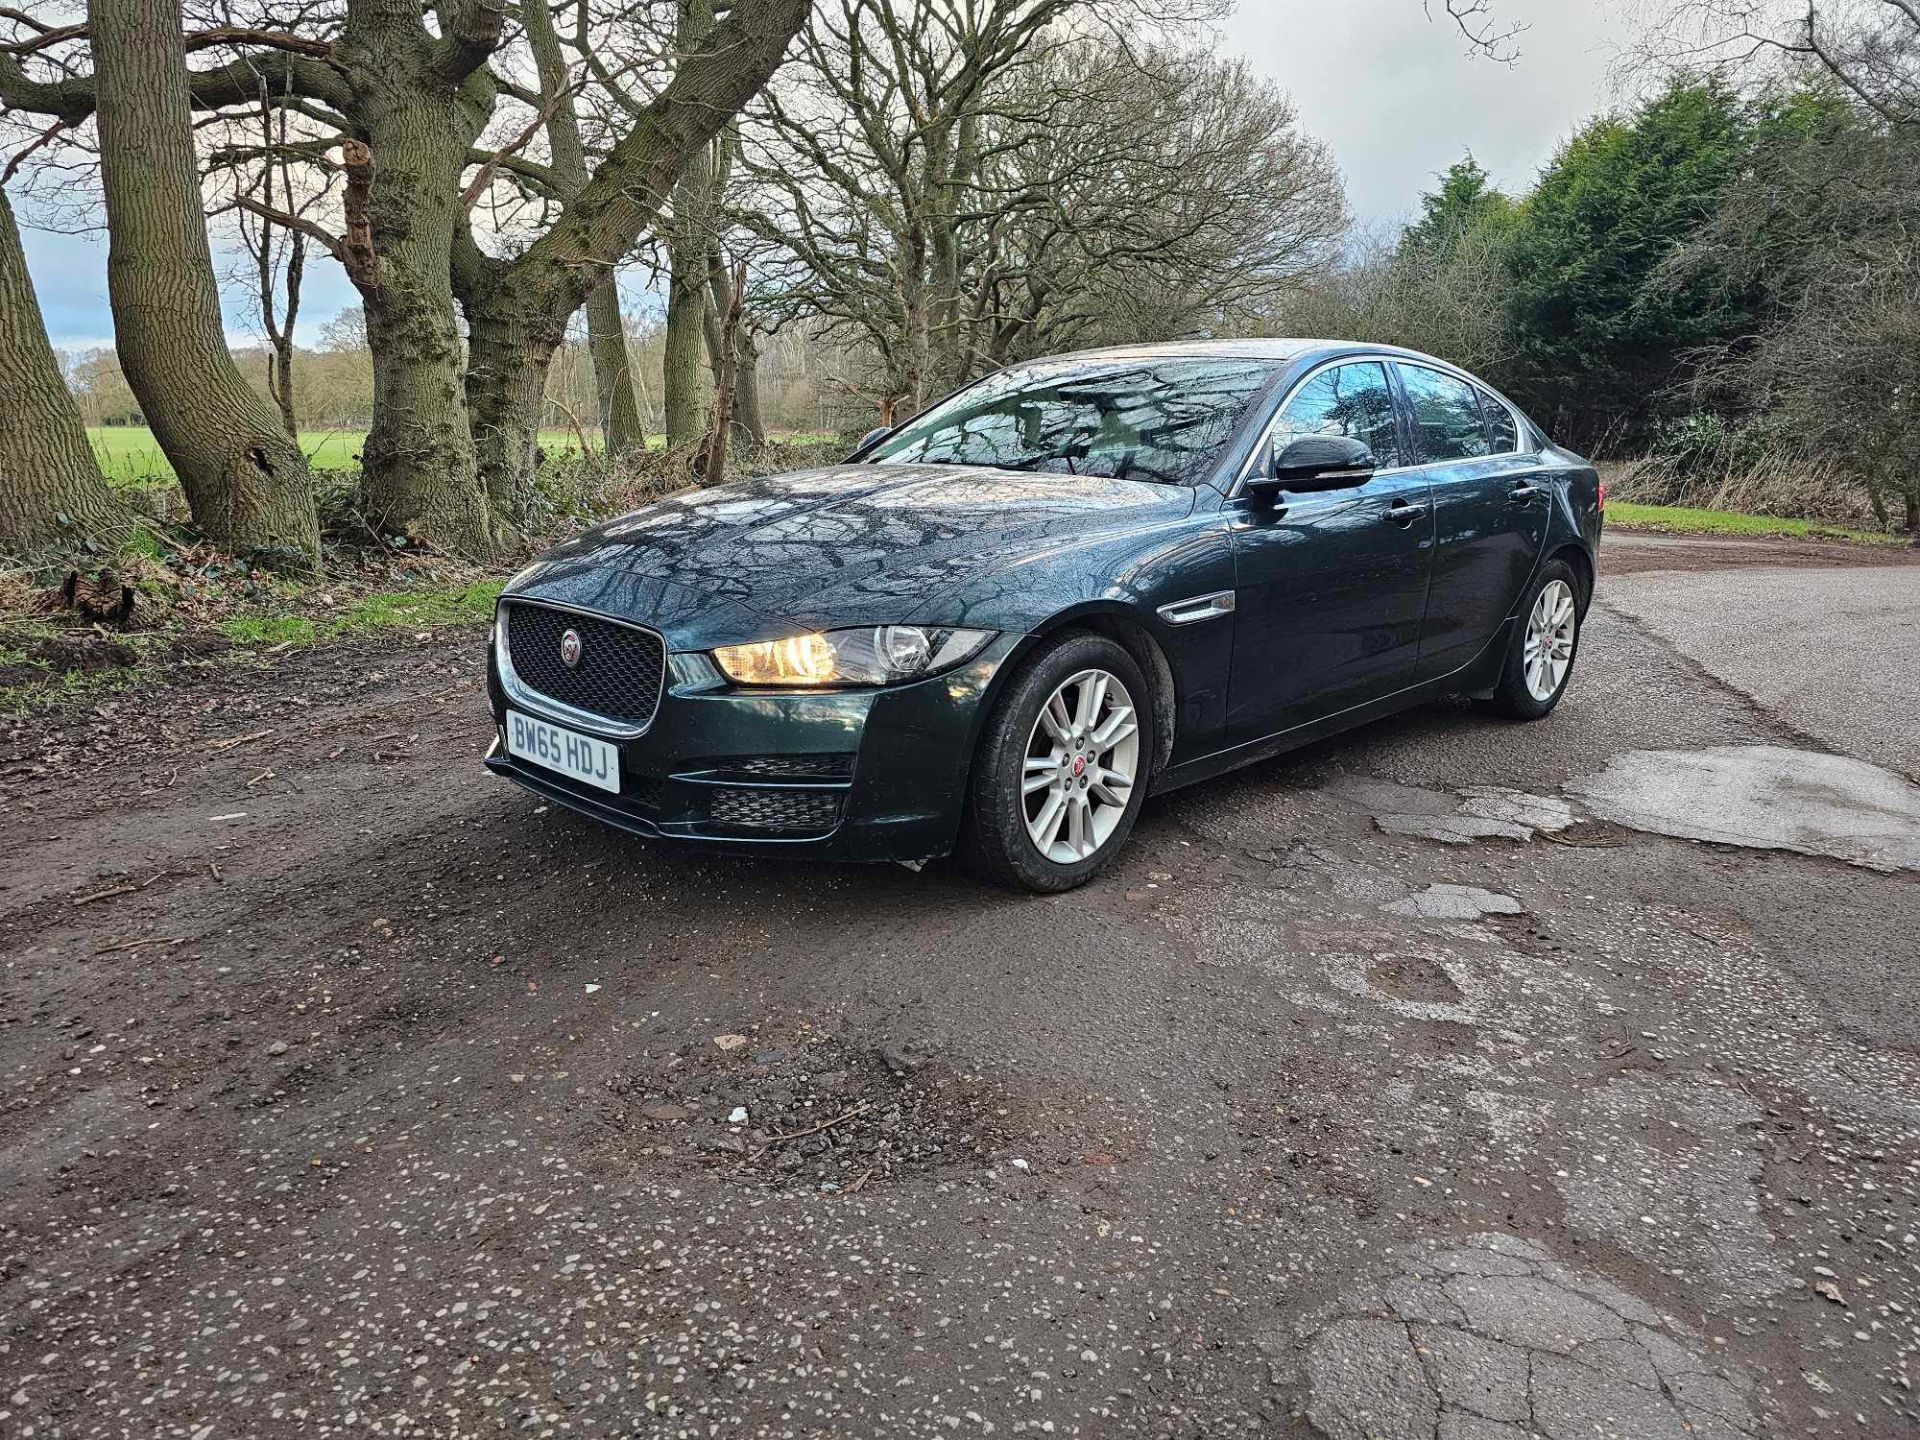 2015 65 JAGUAR XE SALOON - STARTS AND DRIVES BUT ENGINE IS NOISY - ALLOY WHEELS - 5 SERVICES